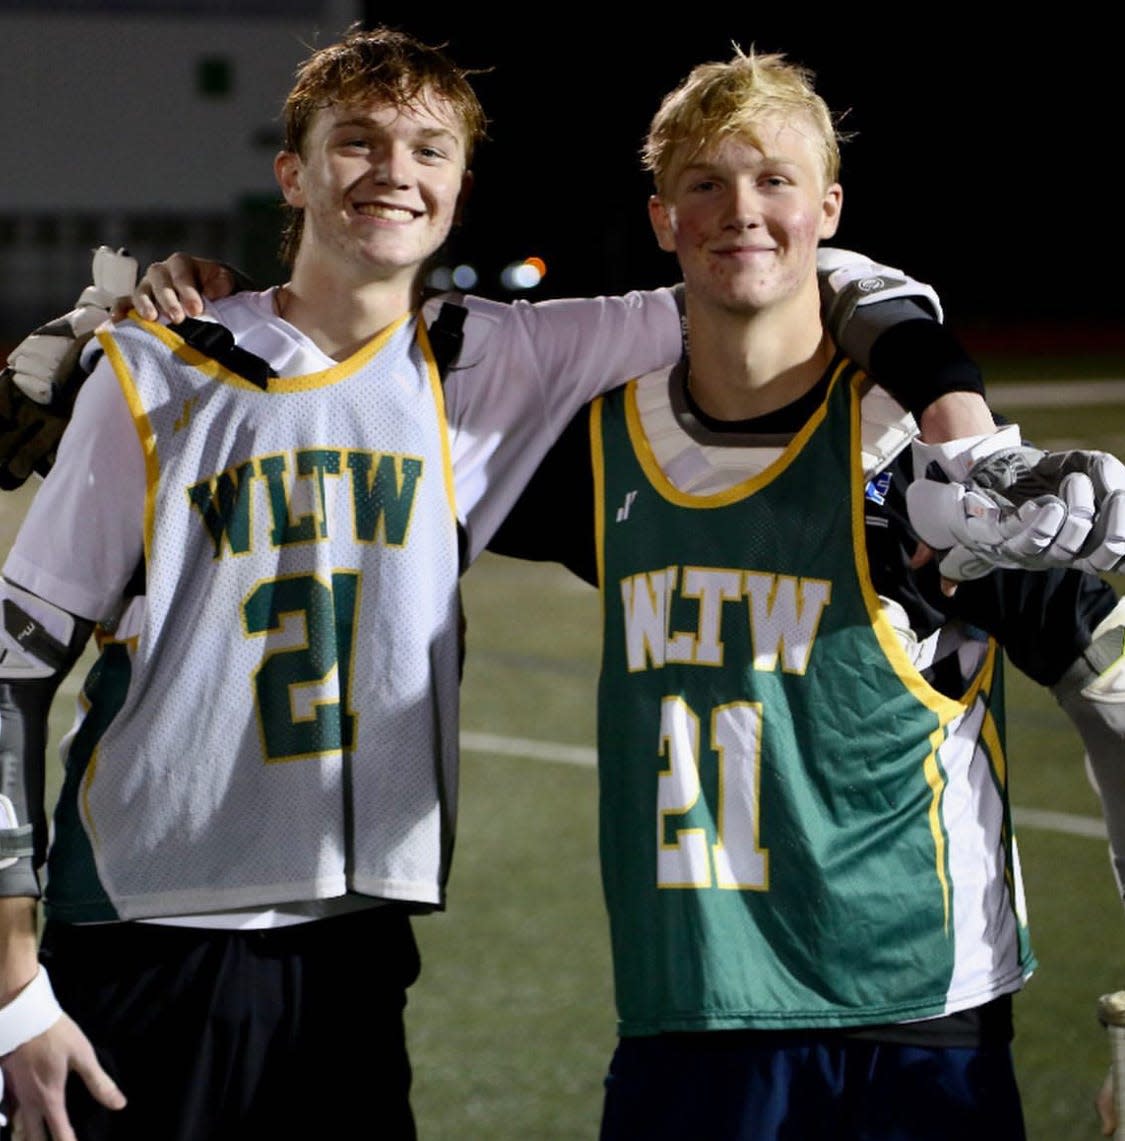 Gavin and Sean Meyers (left to right) were critical to Jupiter boys lacrosse's 2023 run to region championships. Now, Gavin hopes to reach the 2A state championship to make his brother proud.